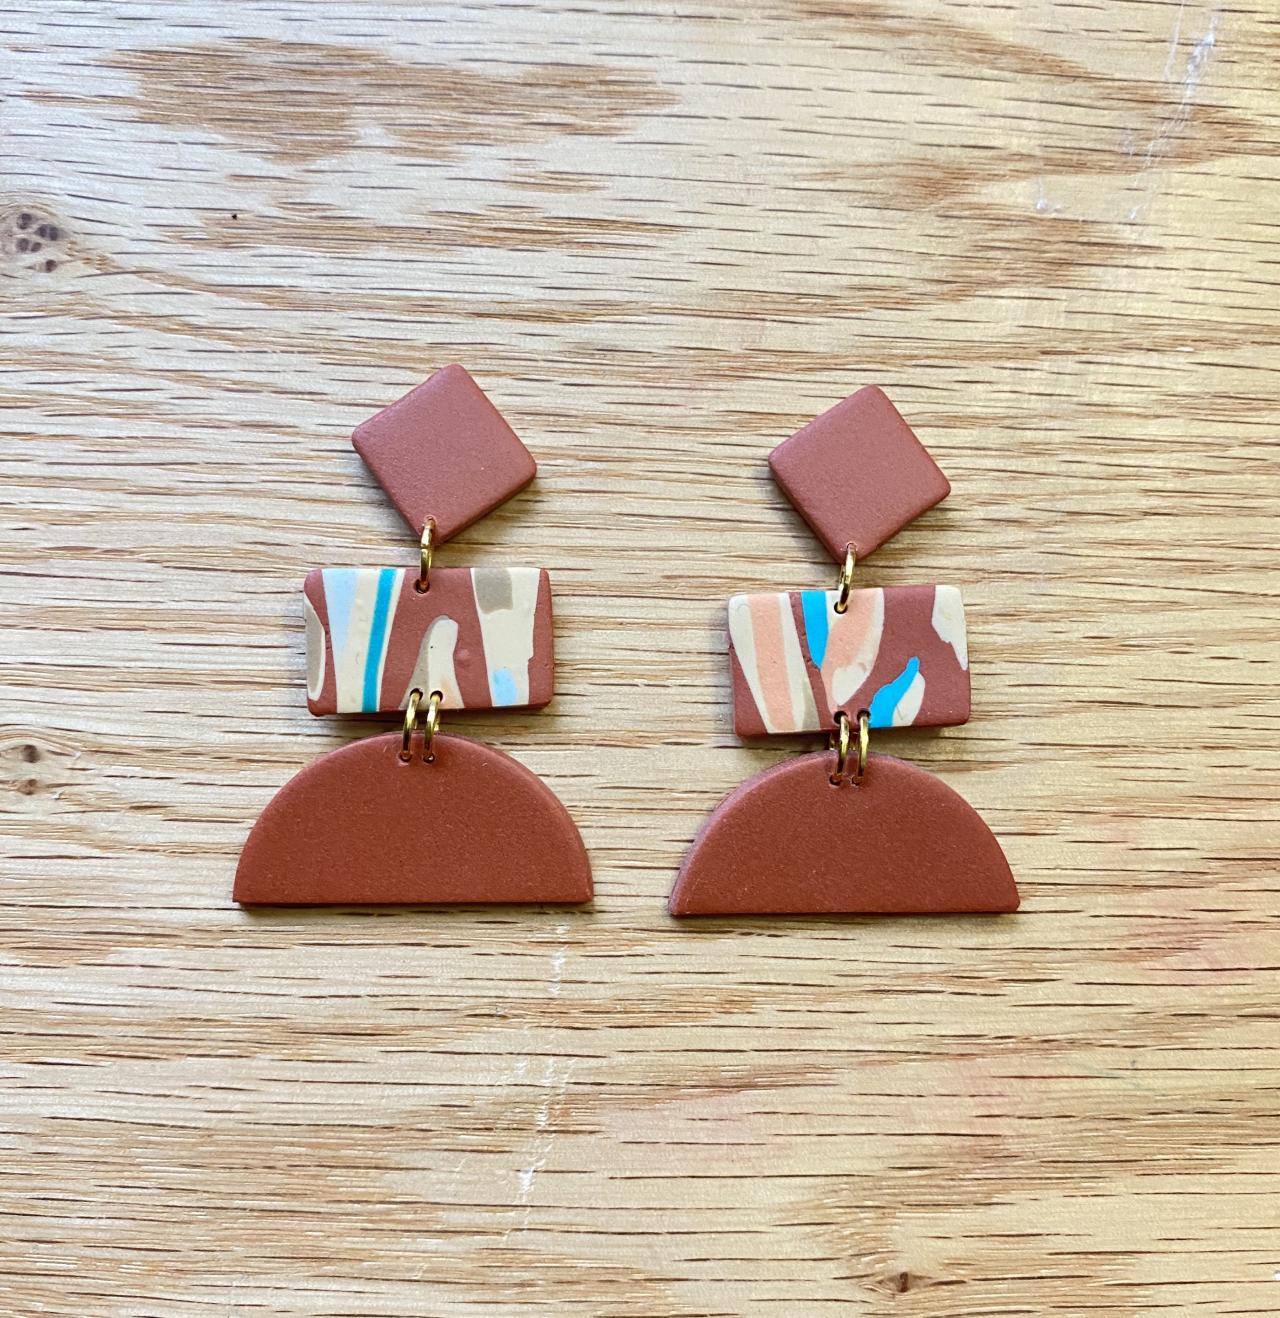 Polymer Clay Statement Earrings | Aida Polymer Clay Drop Earrings | Terrazzo | Cinnamon Polymer Clay Dangle Earrings | Teal | Nude | Gold | Brown